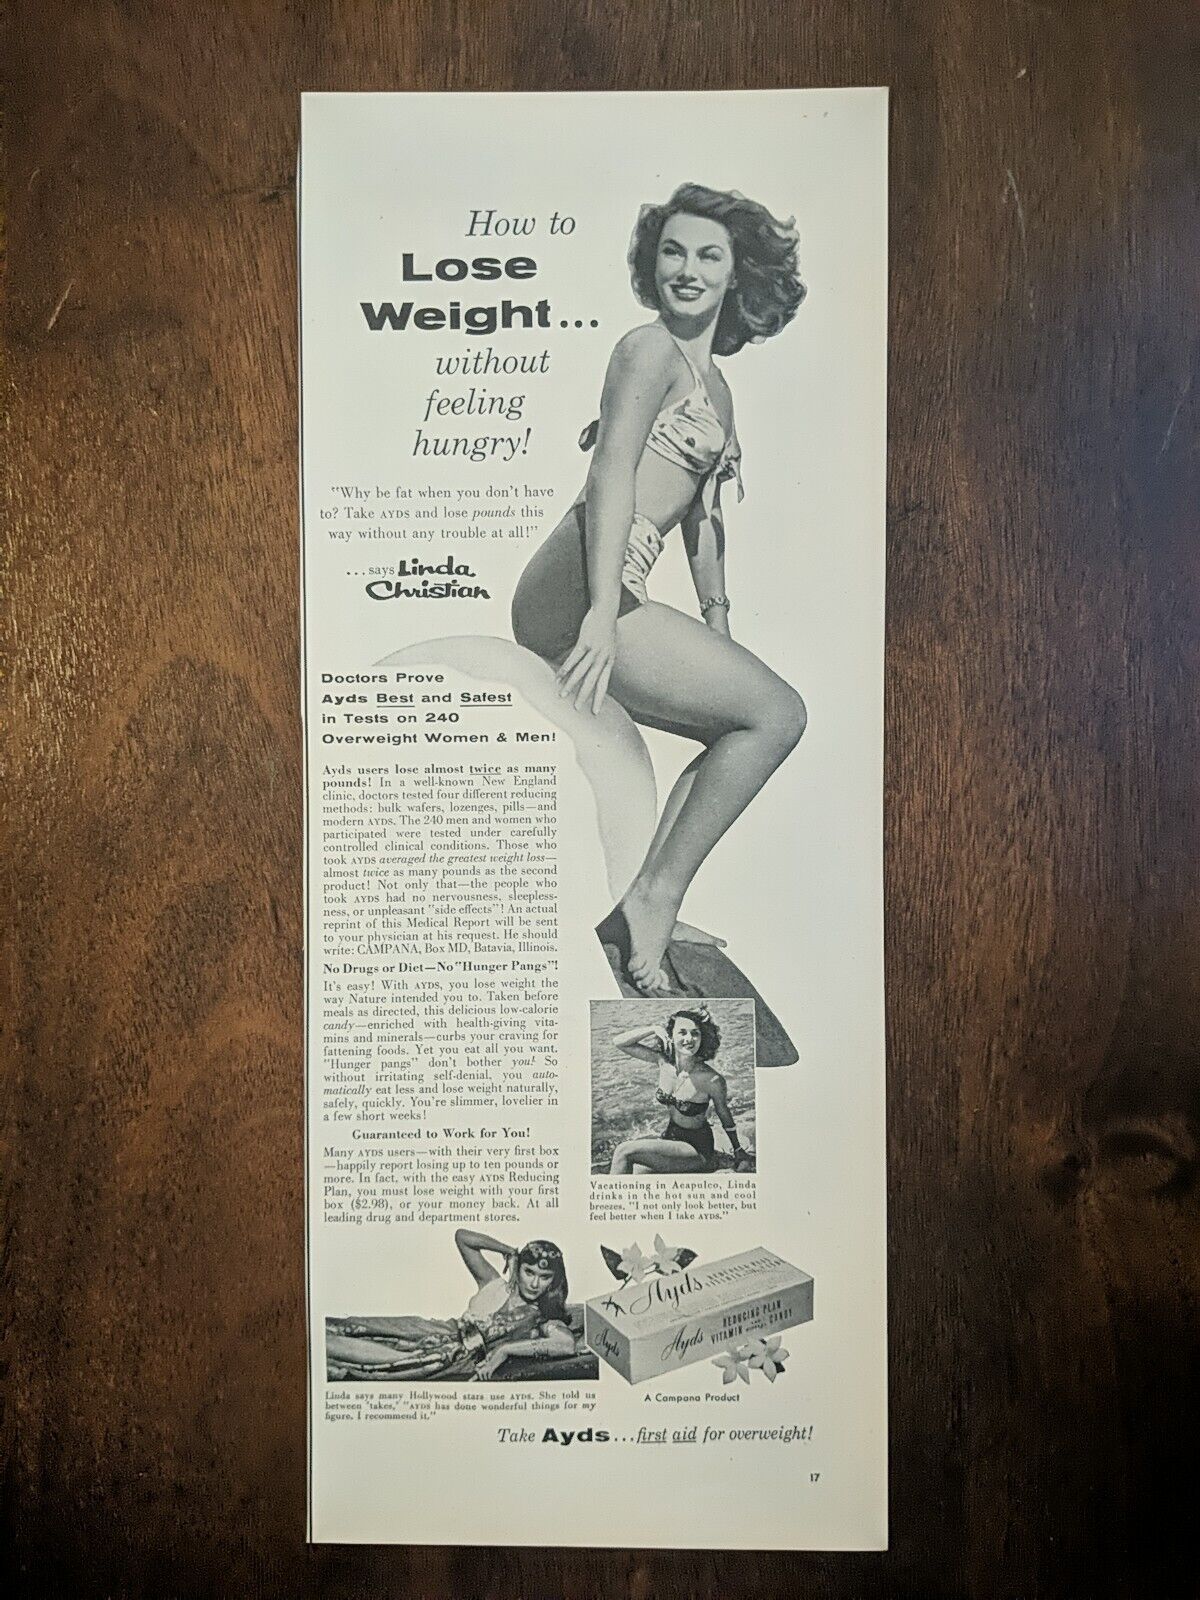 1955 vintage ayds candy print ad . Featuring Linda Christian, Why Be Fat